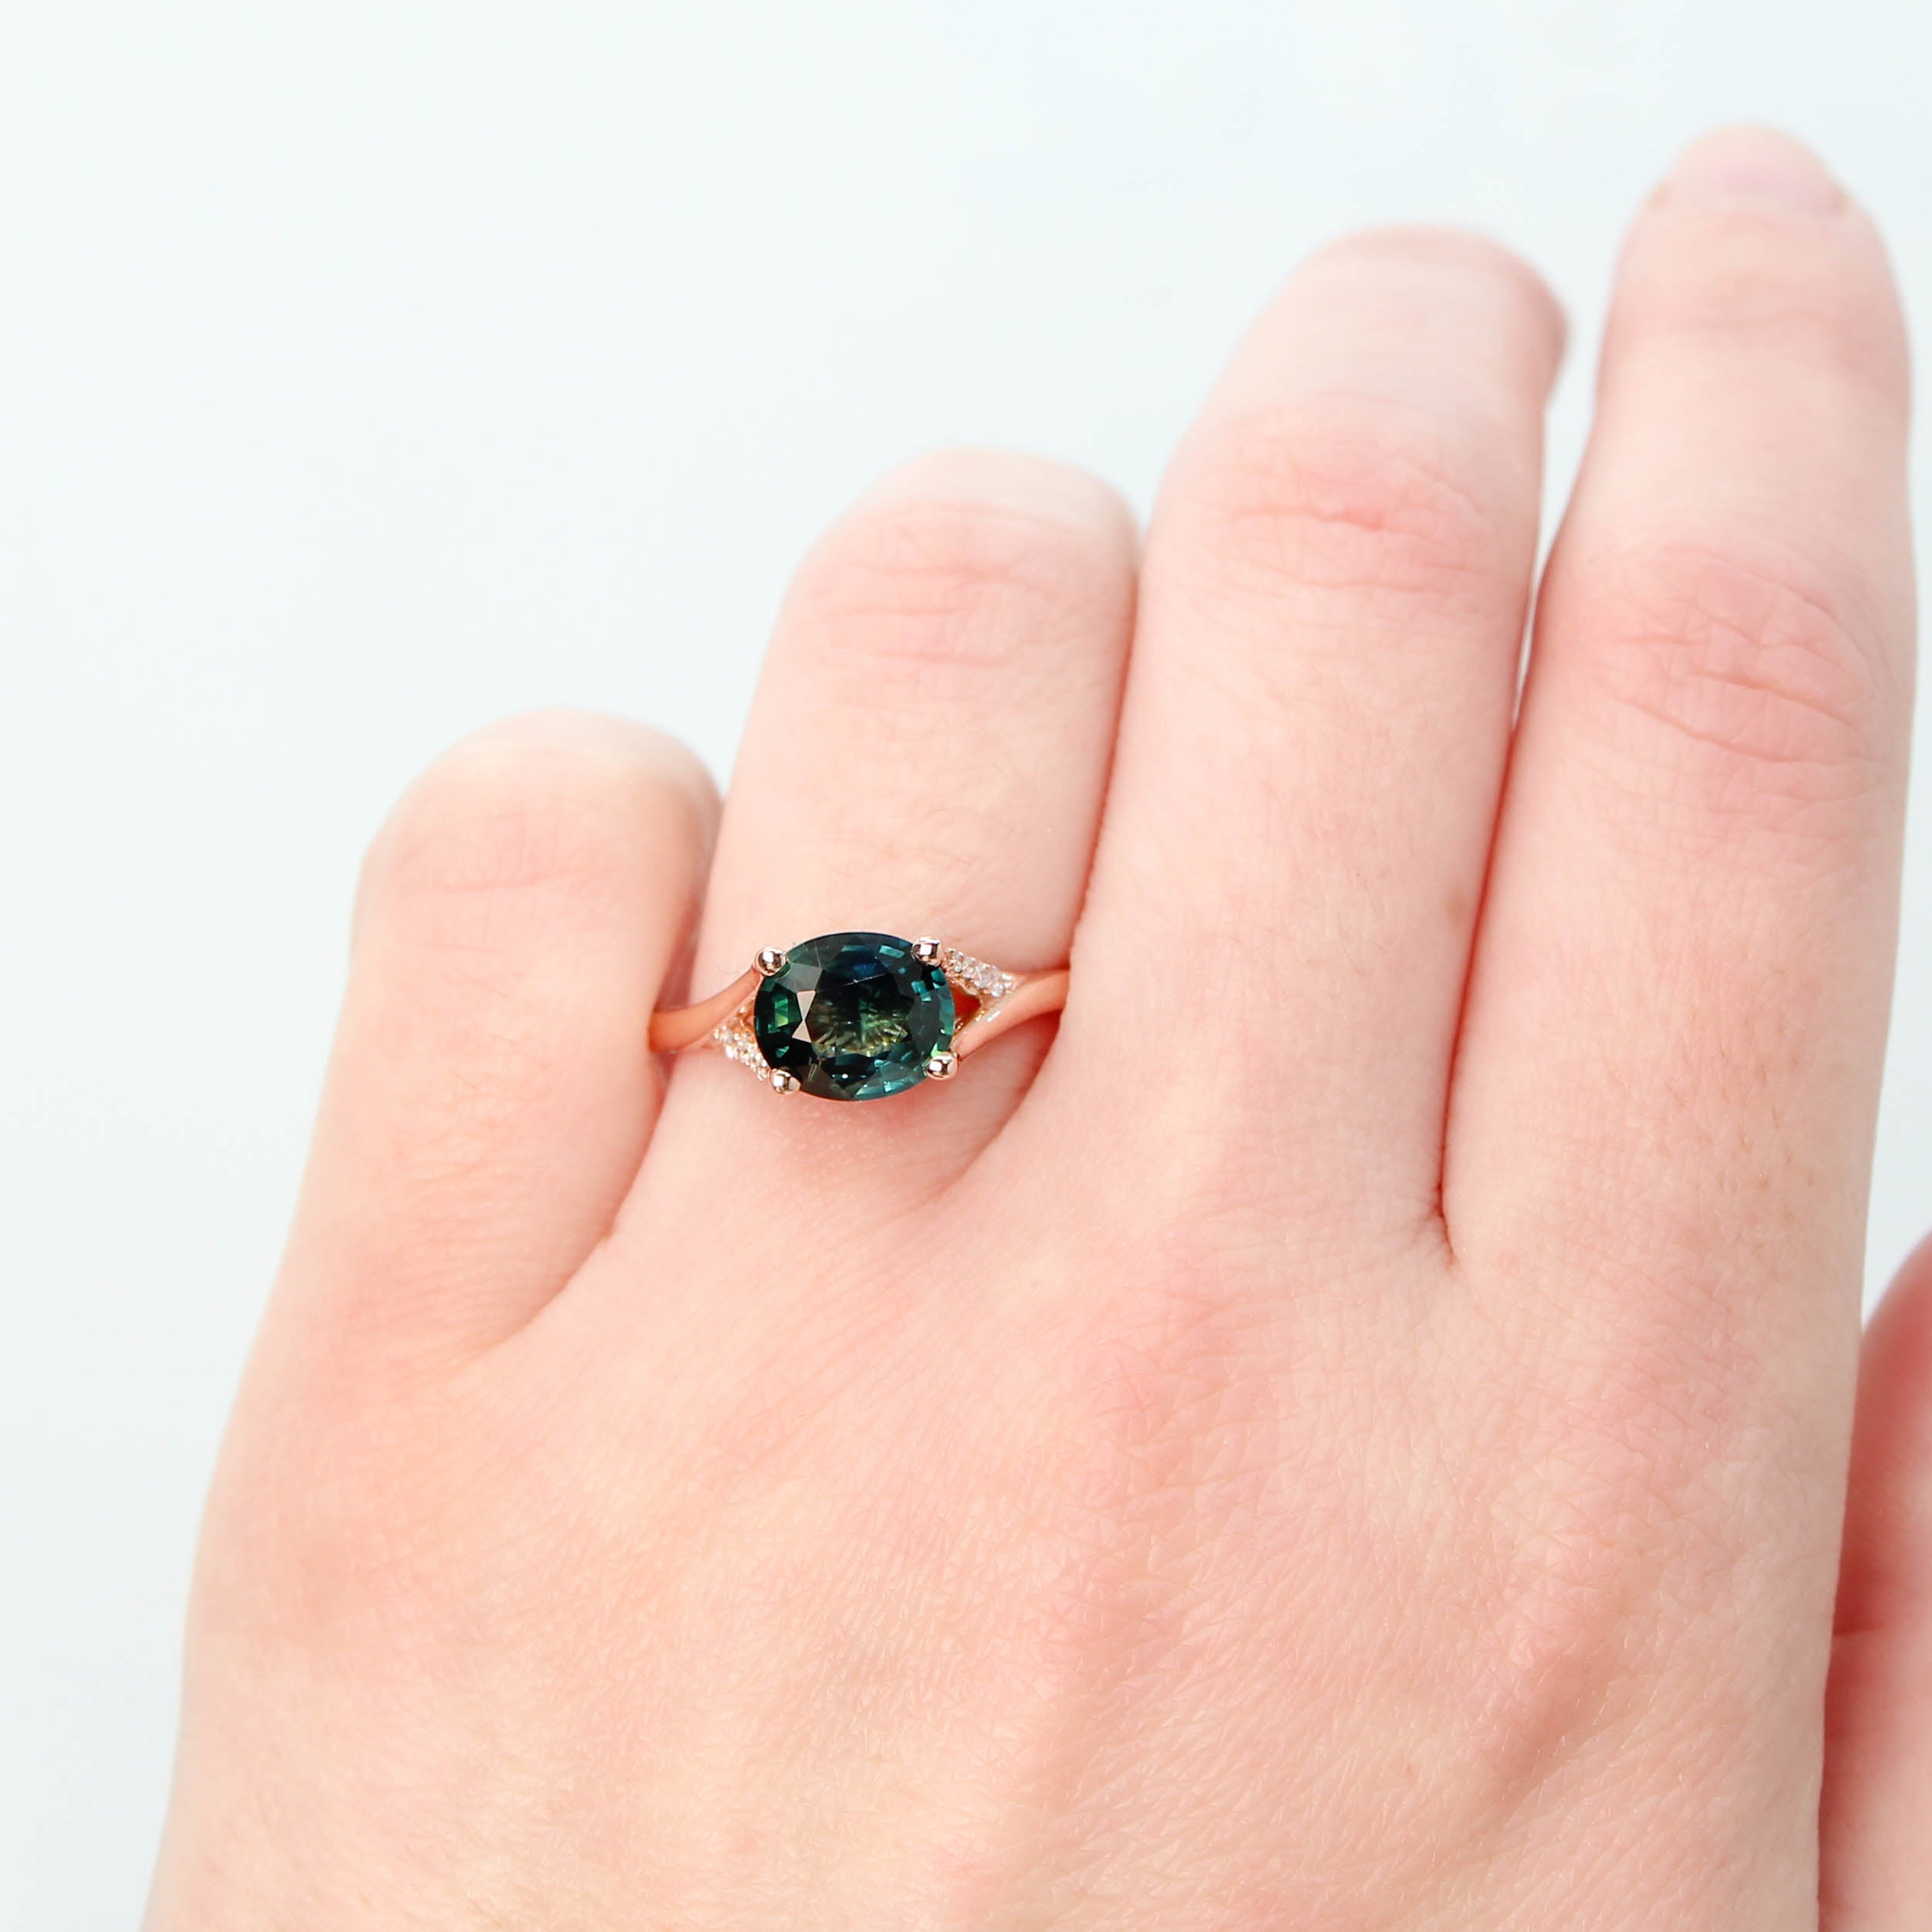 Kennedy Ring with a 2.12 Carat Oval Teal Sapphire and White Accent Diamonds in 14k Rose Gold - Ready to Size and Ship - Midwinter Co. Alternative Bridal Rings and Modern Fine Jewelry